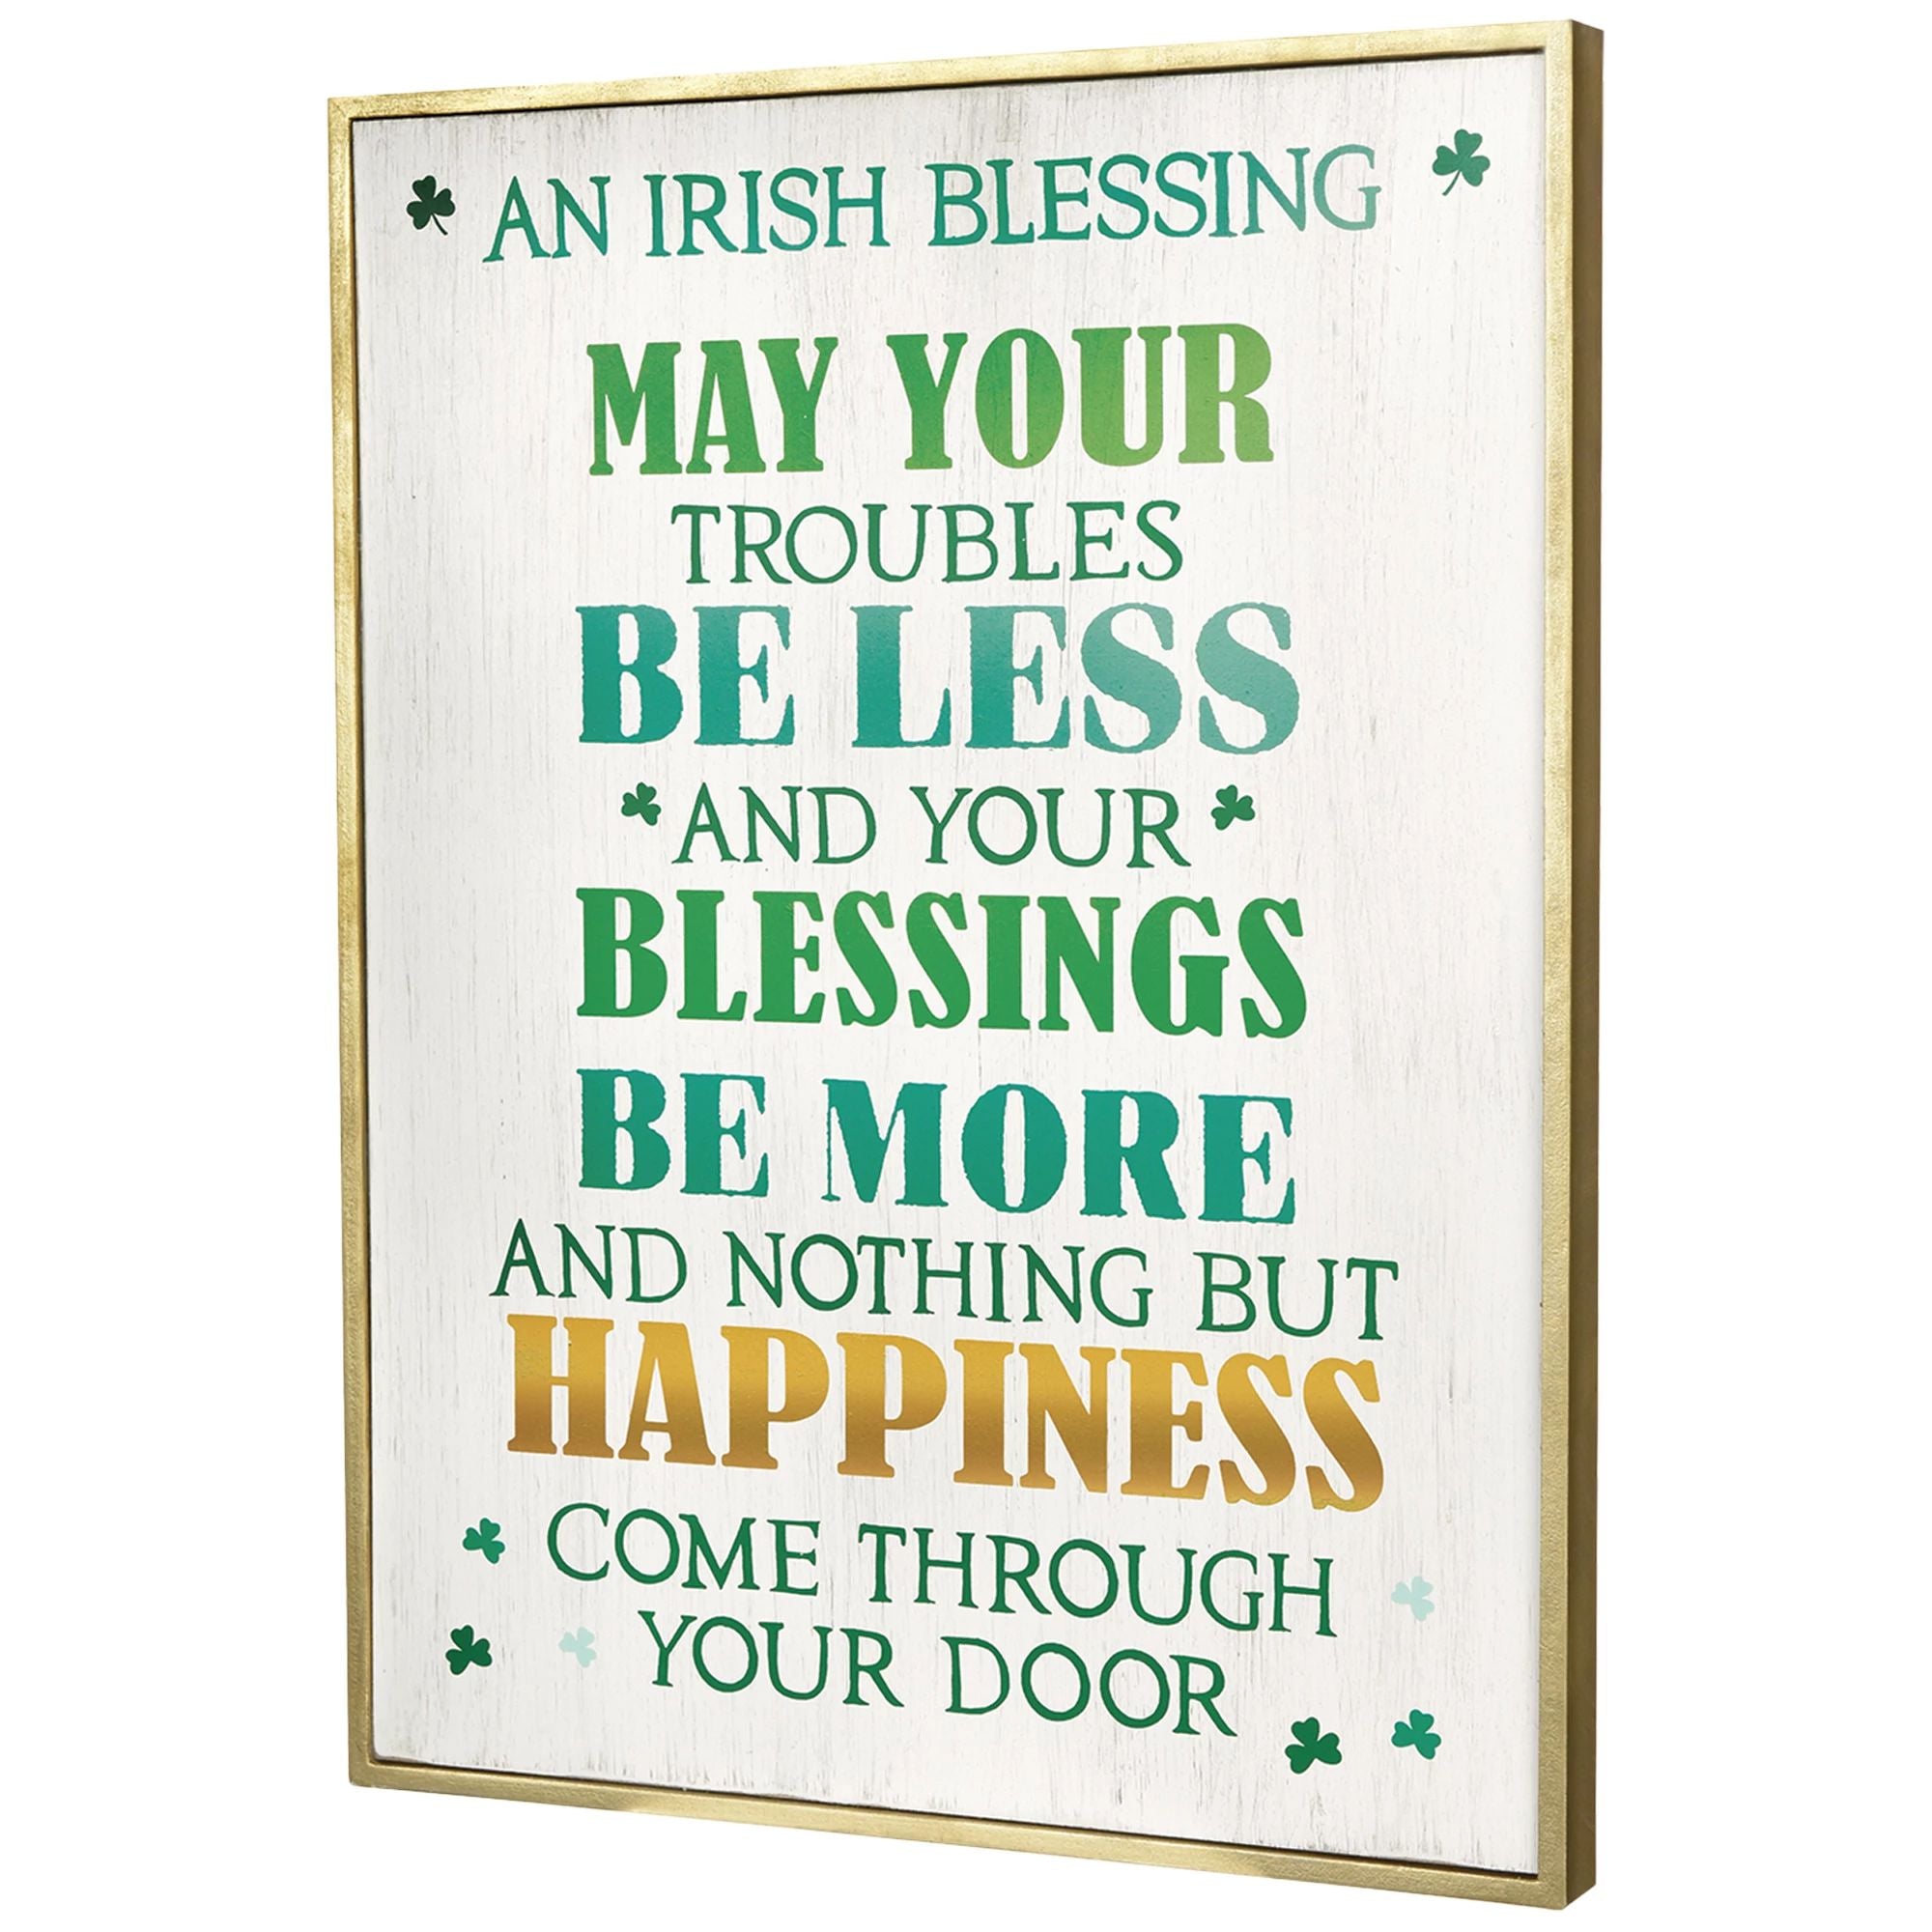 Amscan HOLIDAY: ST. PAT'S "An Irish Blessing" Plaque